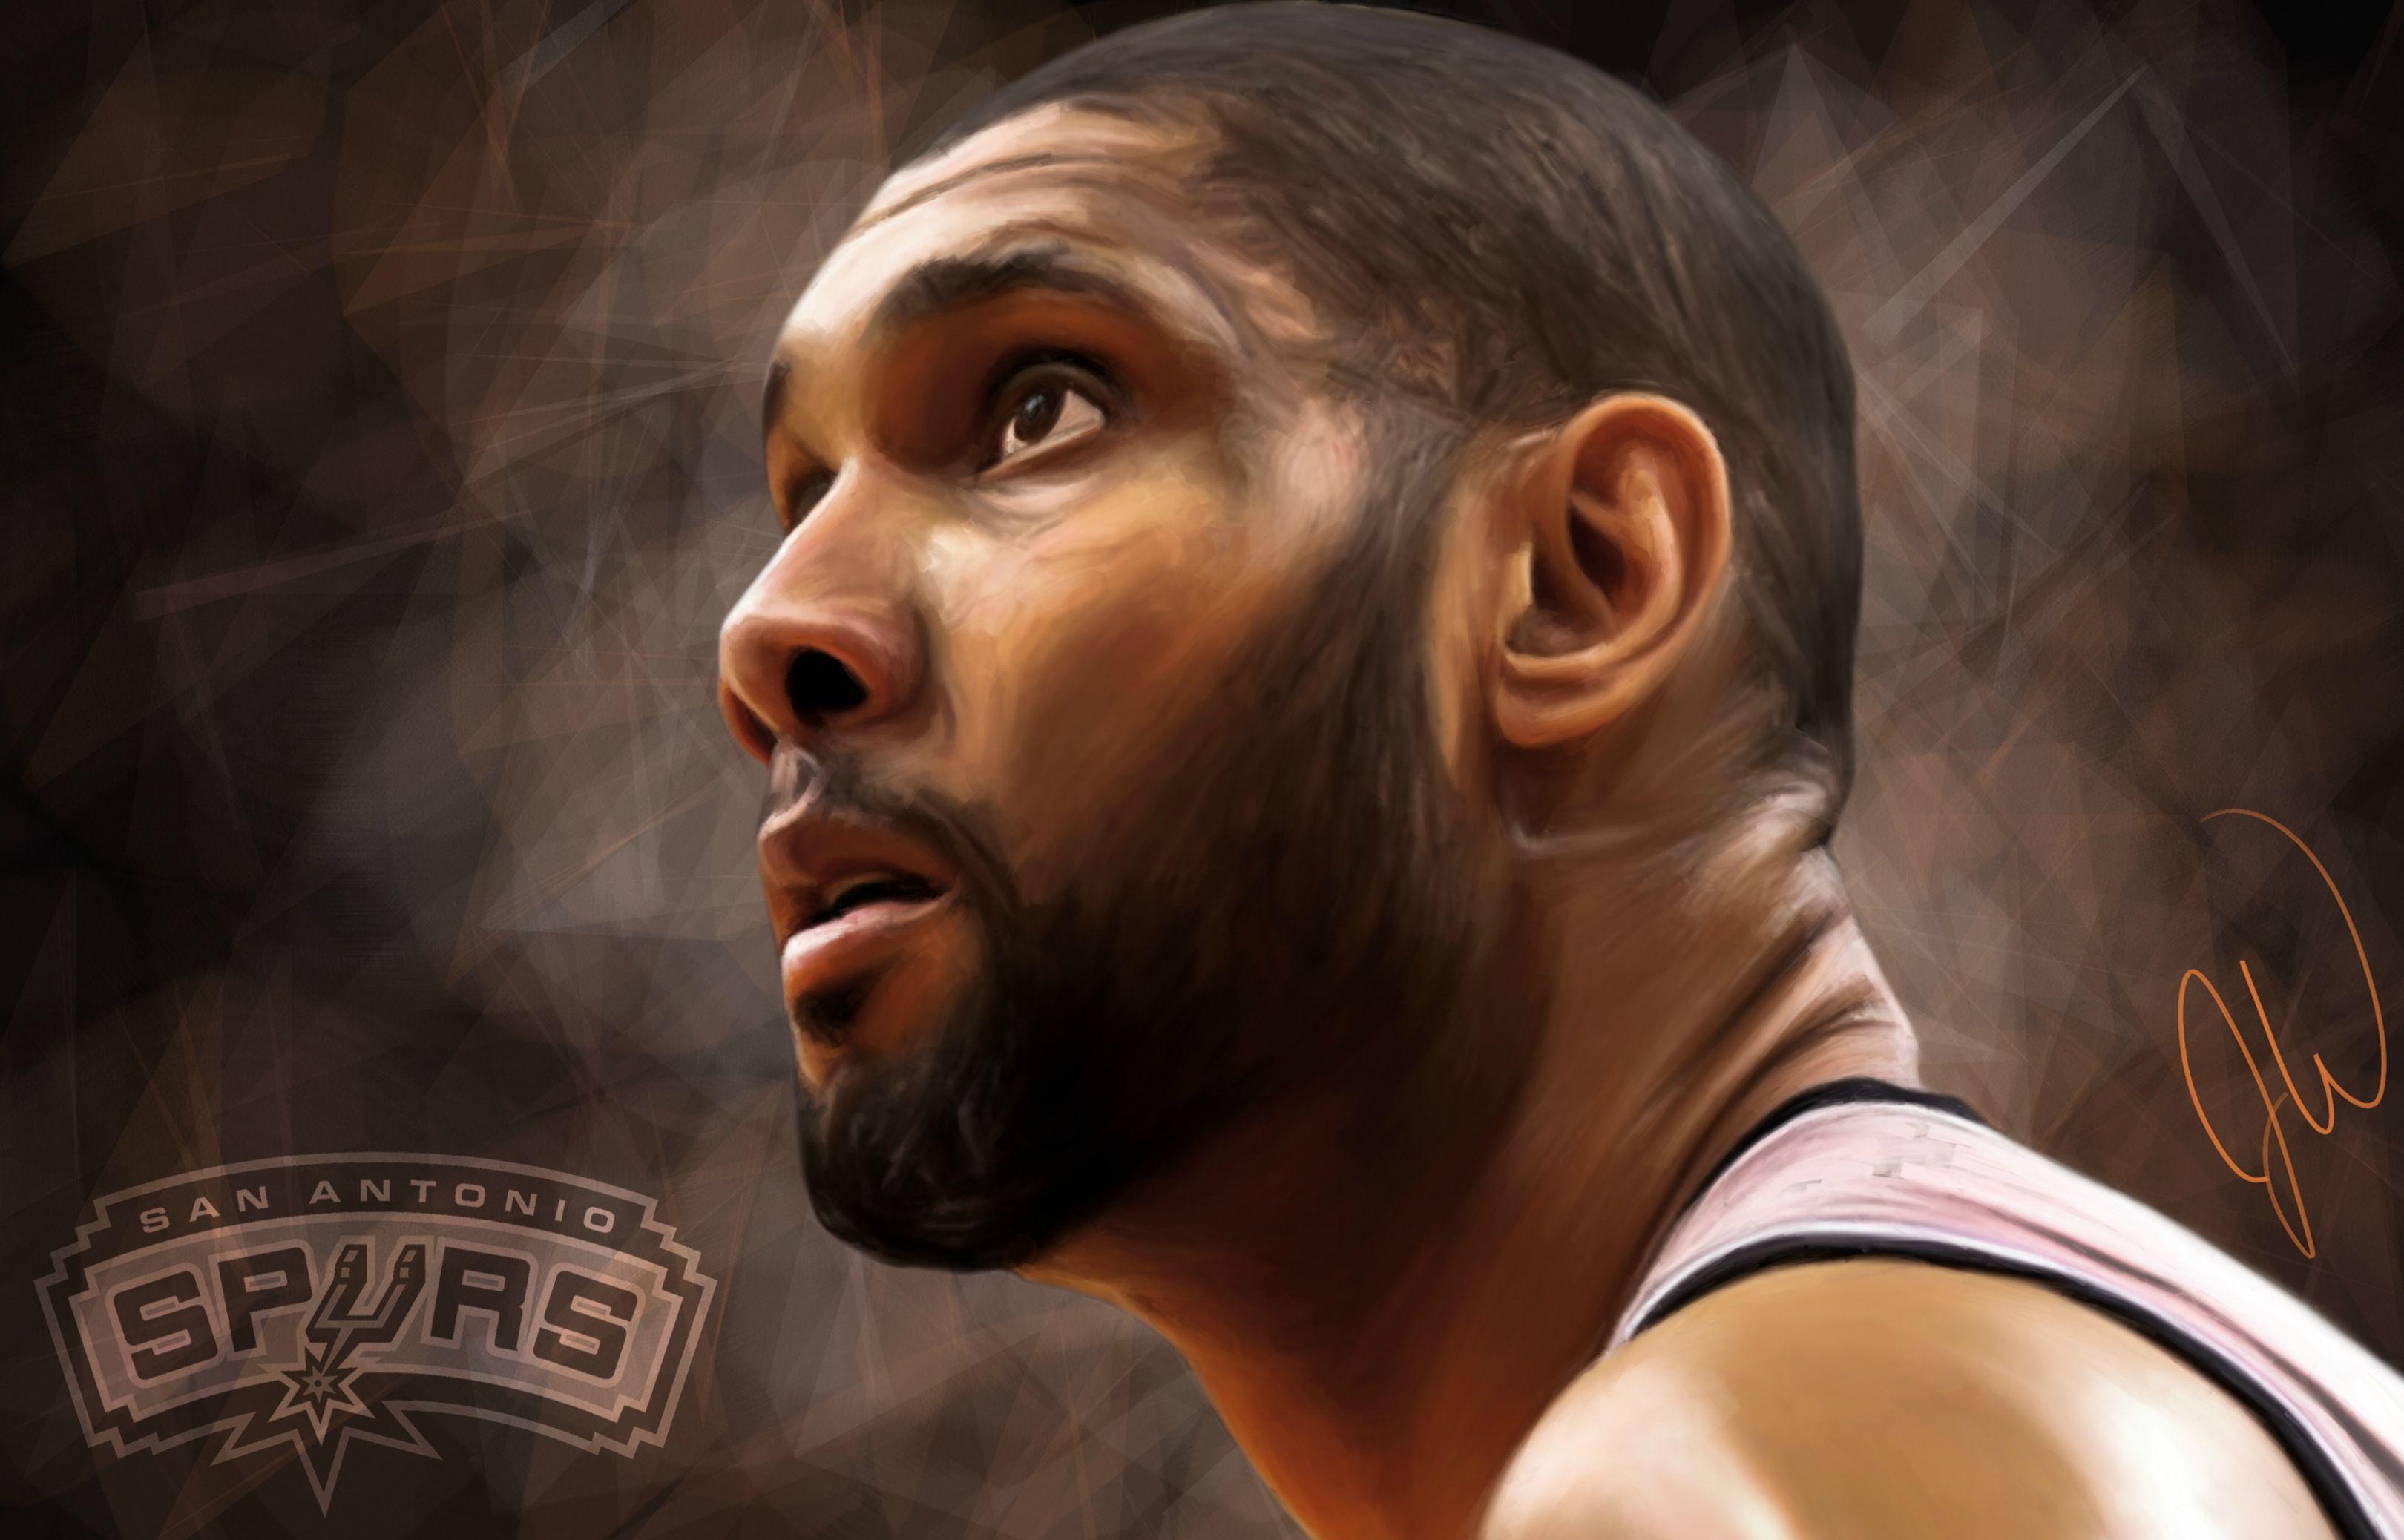 Tim Duncan Wallpaper High Resolution and Quality Download